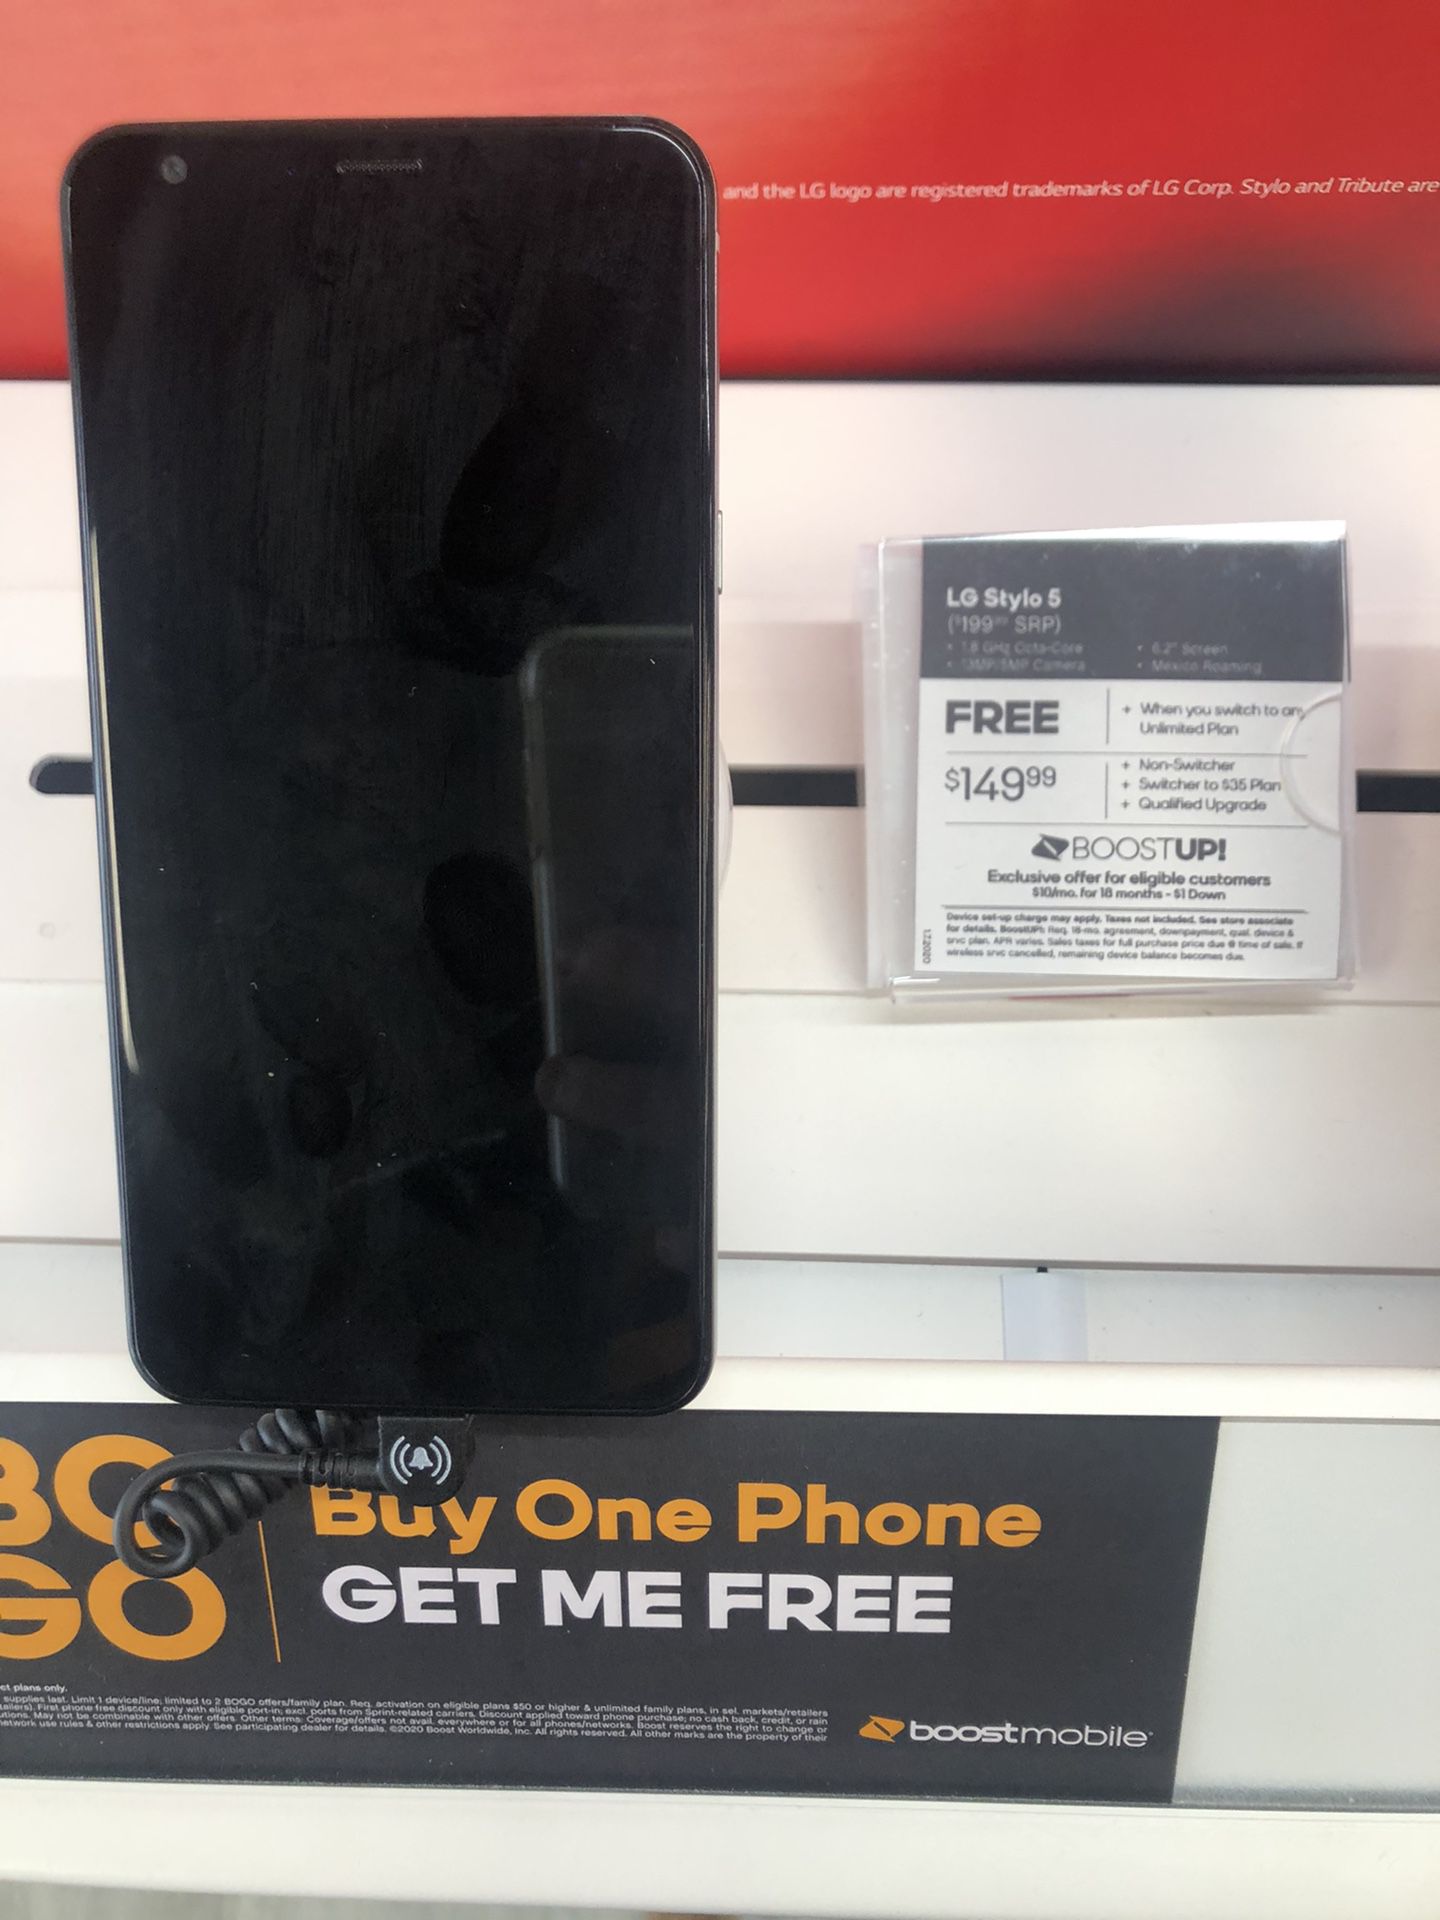 Free LG Stylo 5 when you switch to boost